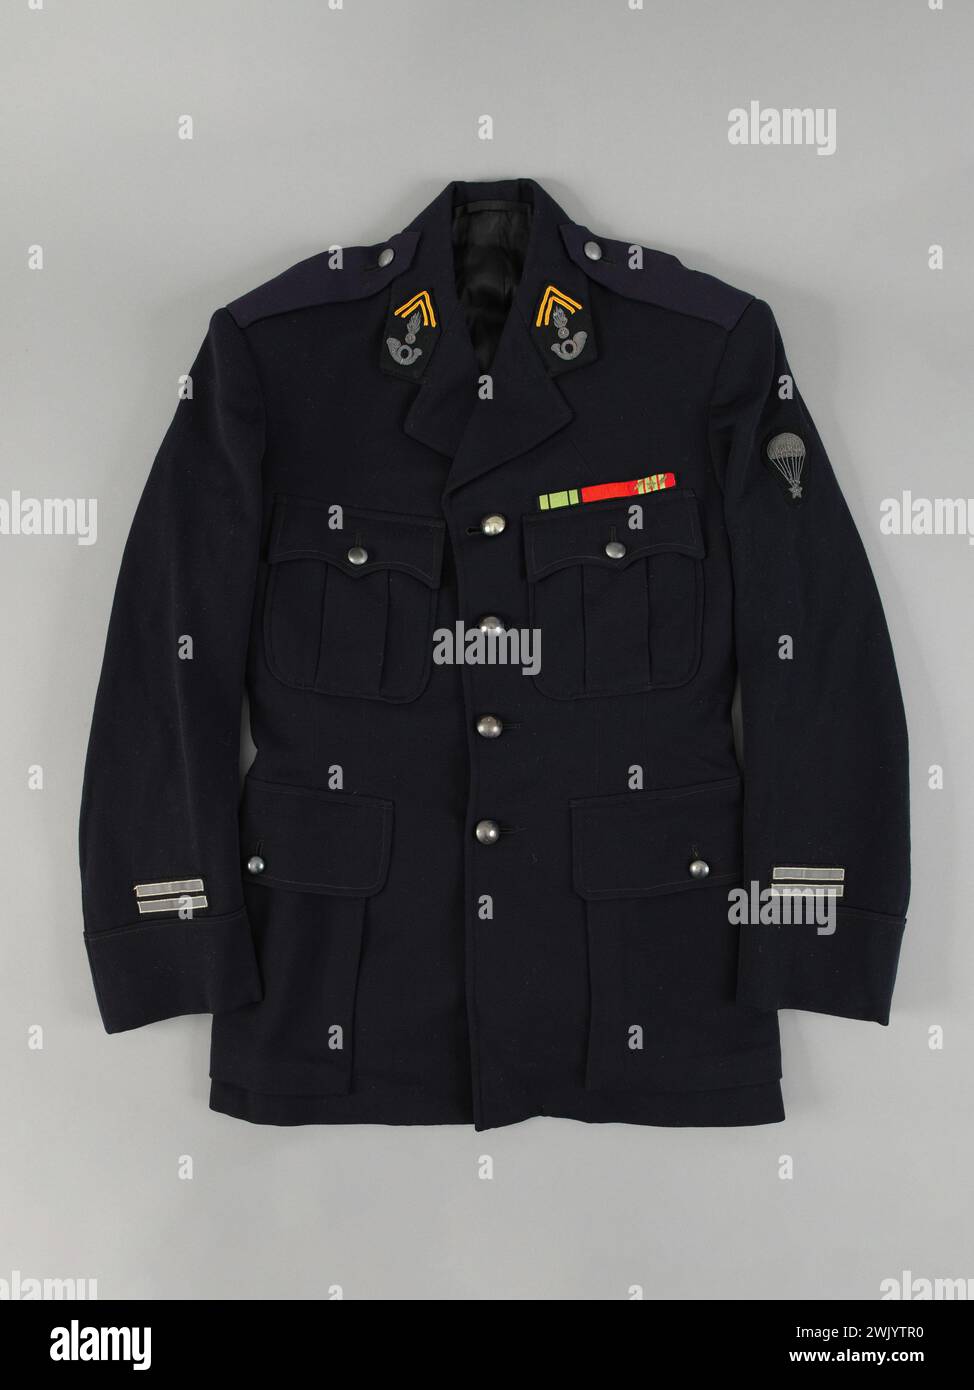 Austin reed jacket of Lieutenant of British manufacture hunters who belonged to Daniel Cordier, companion of the Liberation (title awarded), 1944-05-23. Gabardine, fabric. Metal, embroidered silver ride, mechanical and manual seams, ink. Museum of the Liberation of Paris - General Leclerc Museum - Jean Moulin Museum. Stock Photo